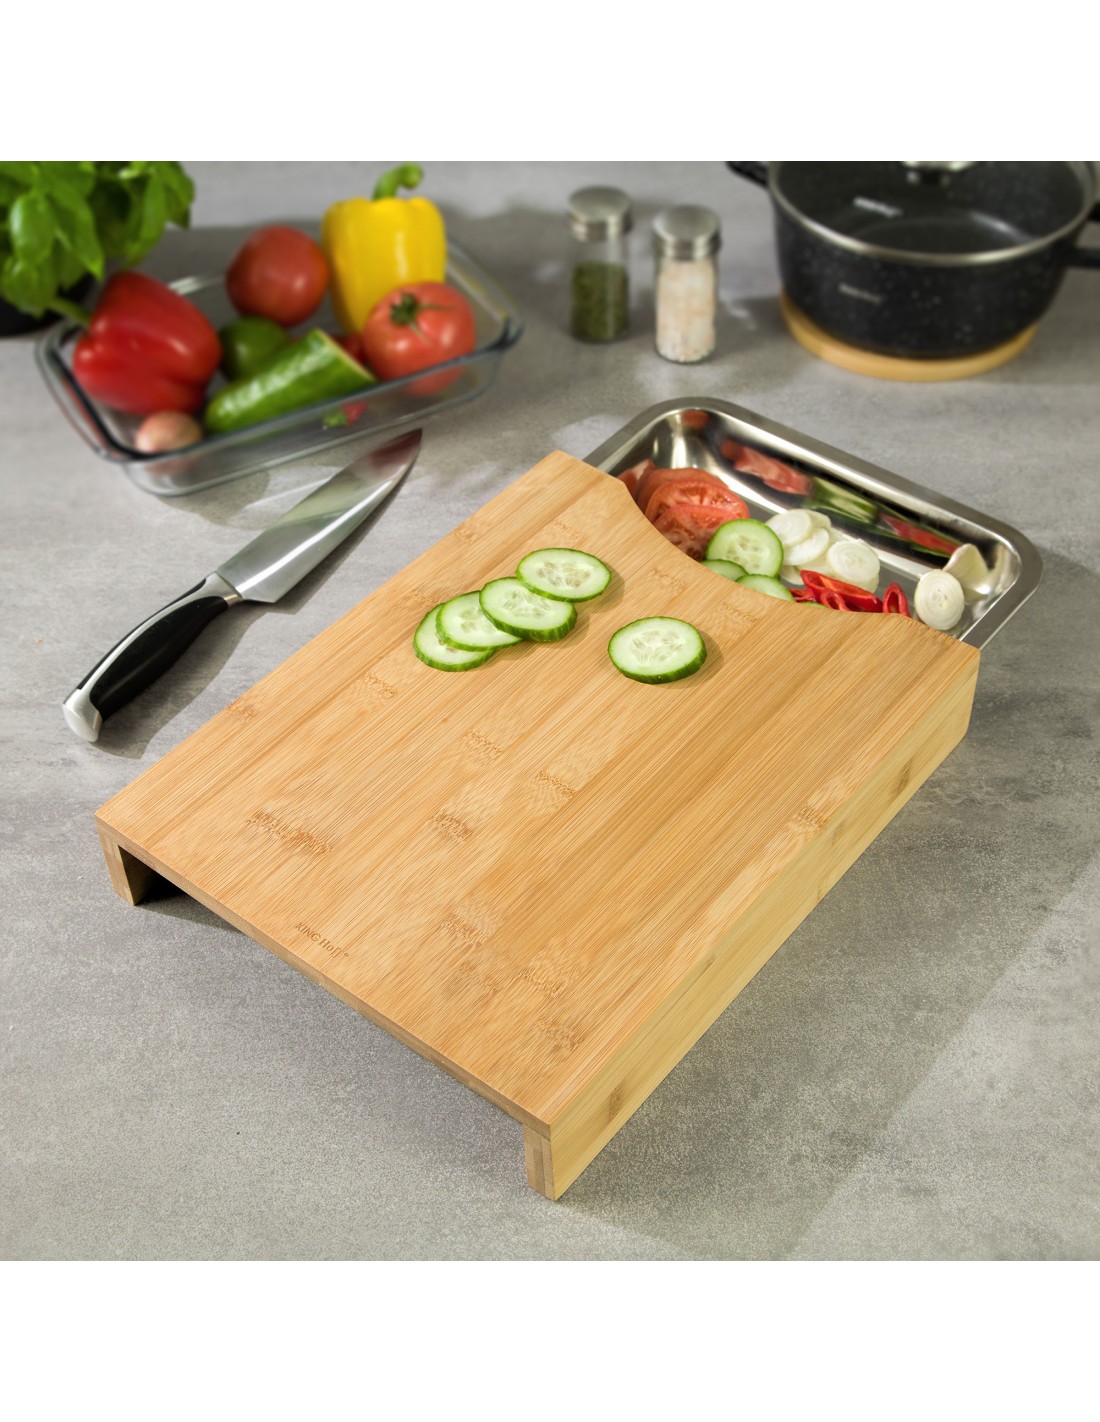 https://kinghoff.com/4116-thickbox_default/cutting-board-with-stainless-steel-drip-tray.jpg